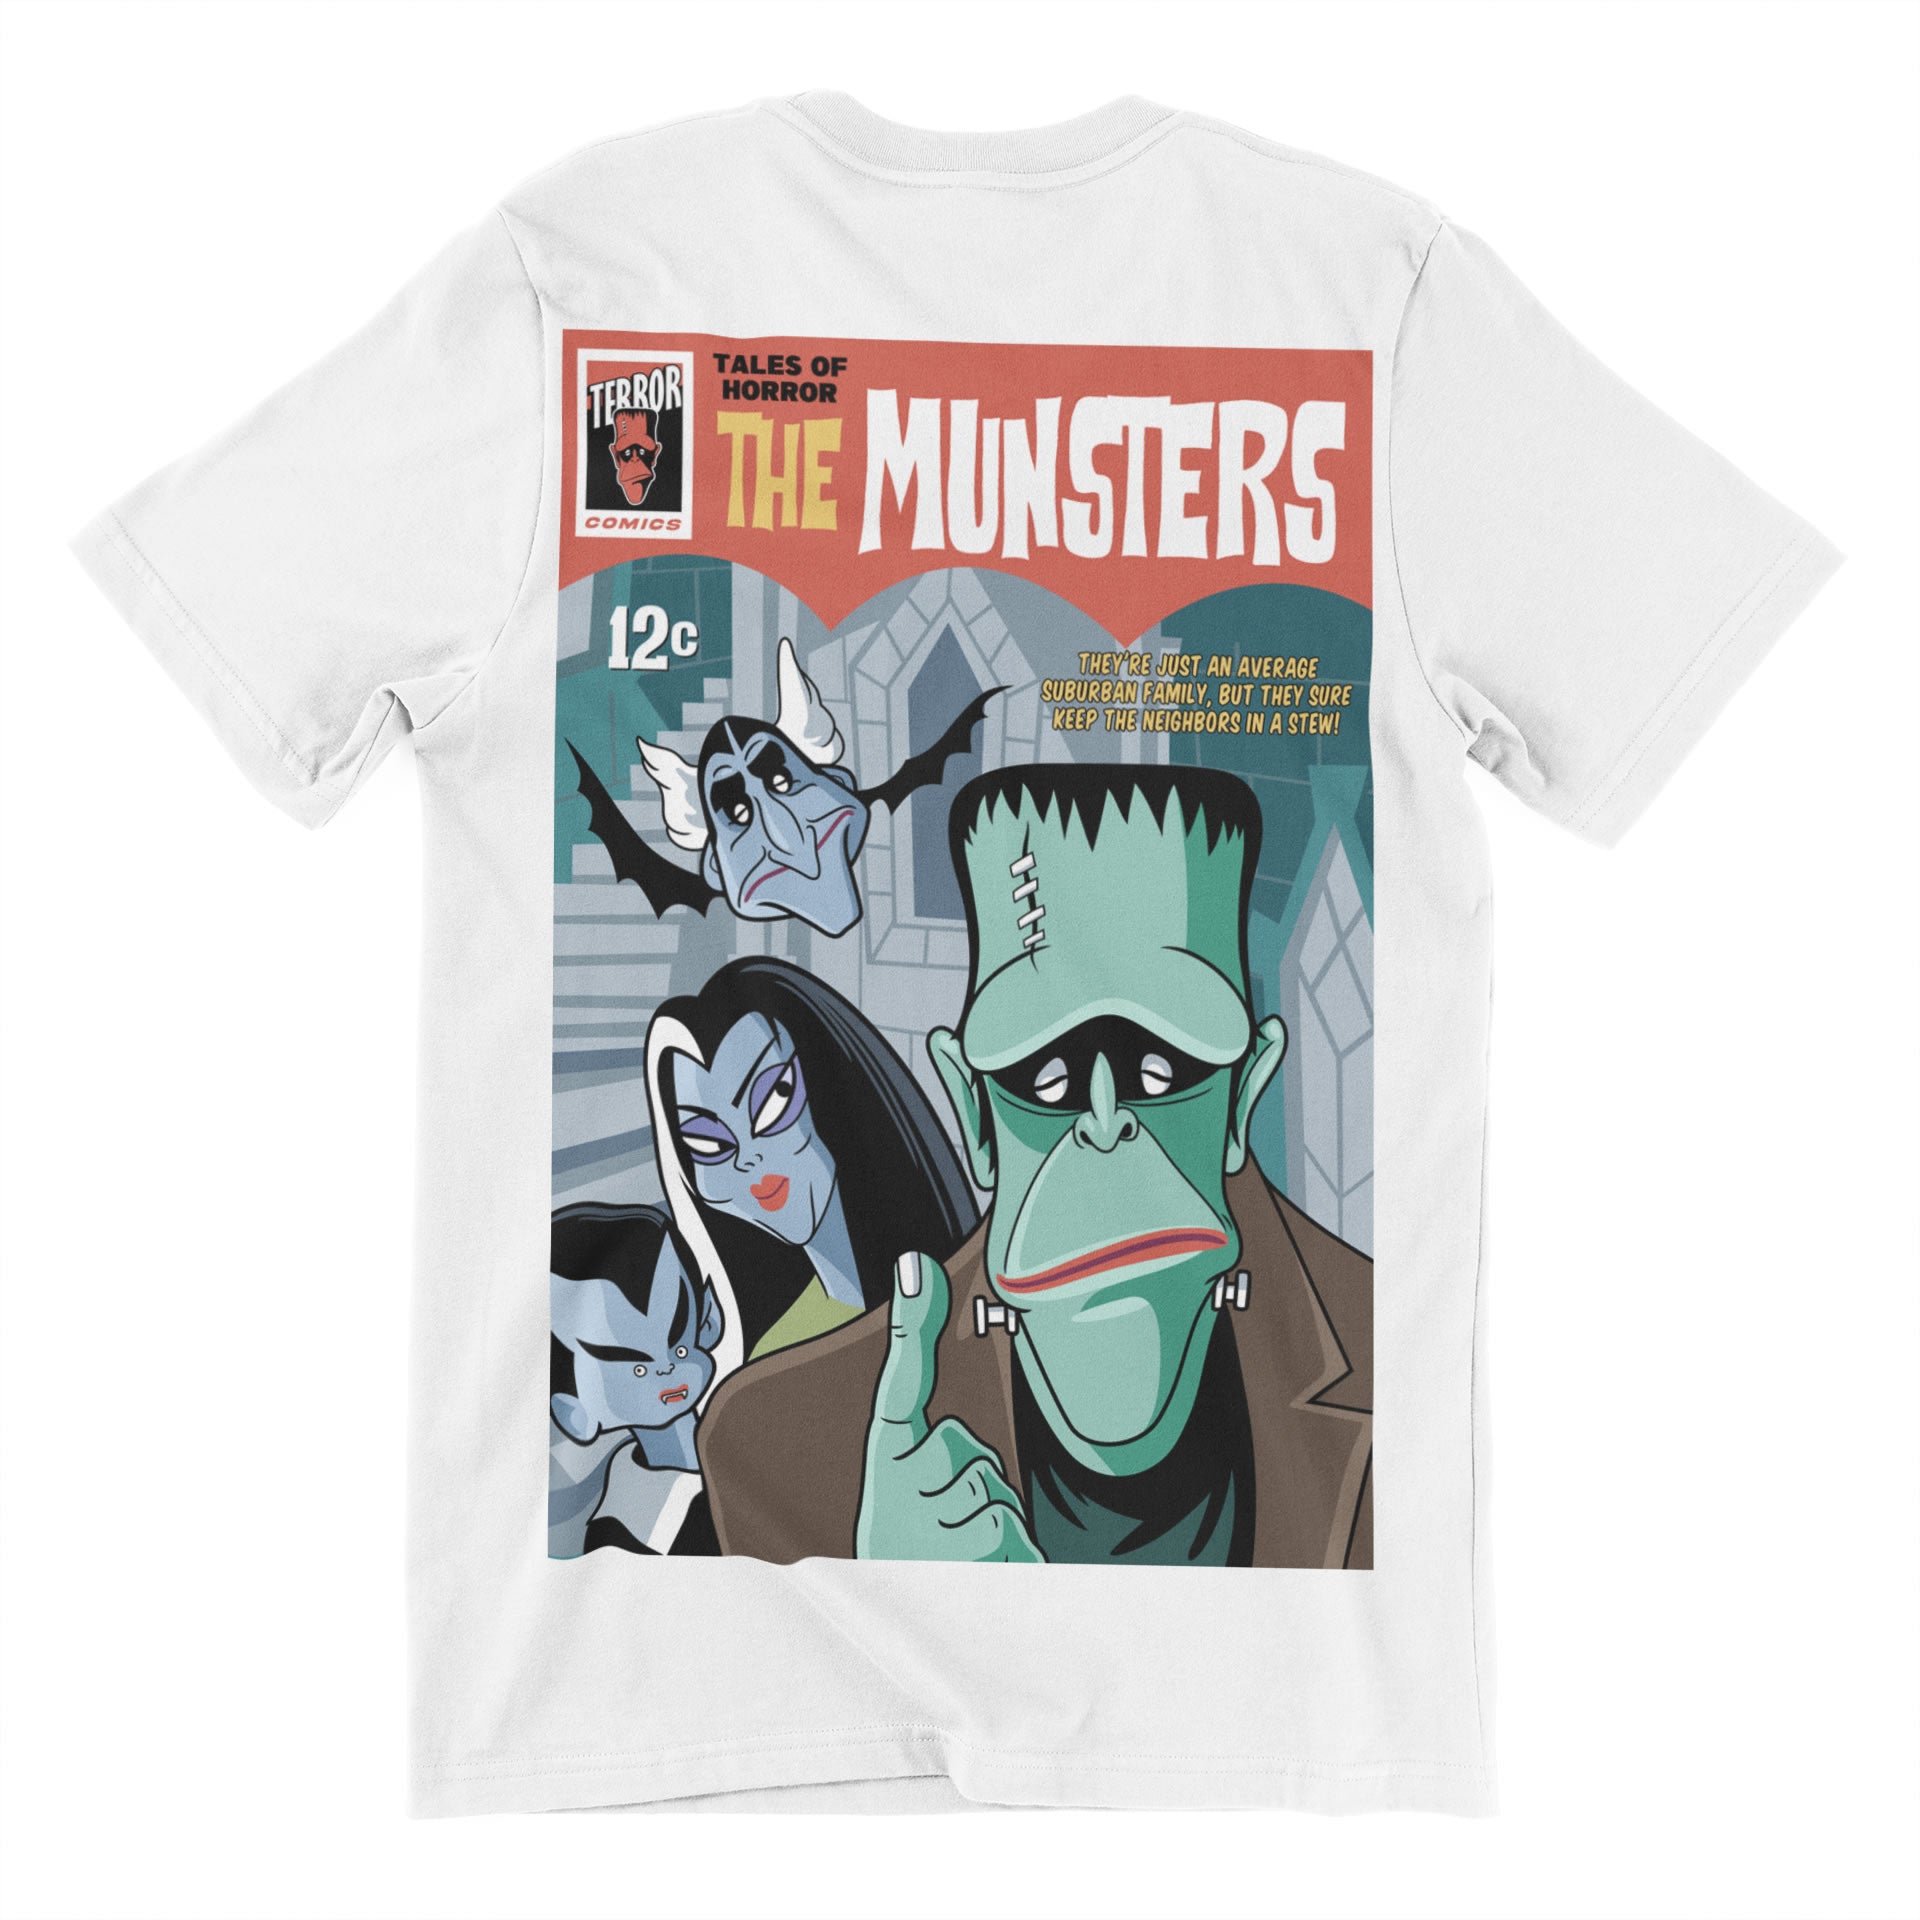 The Munsters Comic Cover Reproduction T-Shirt